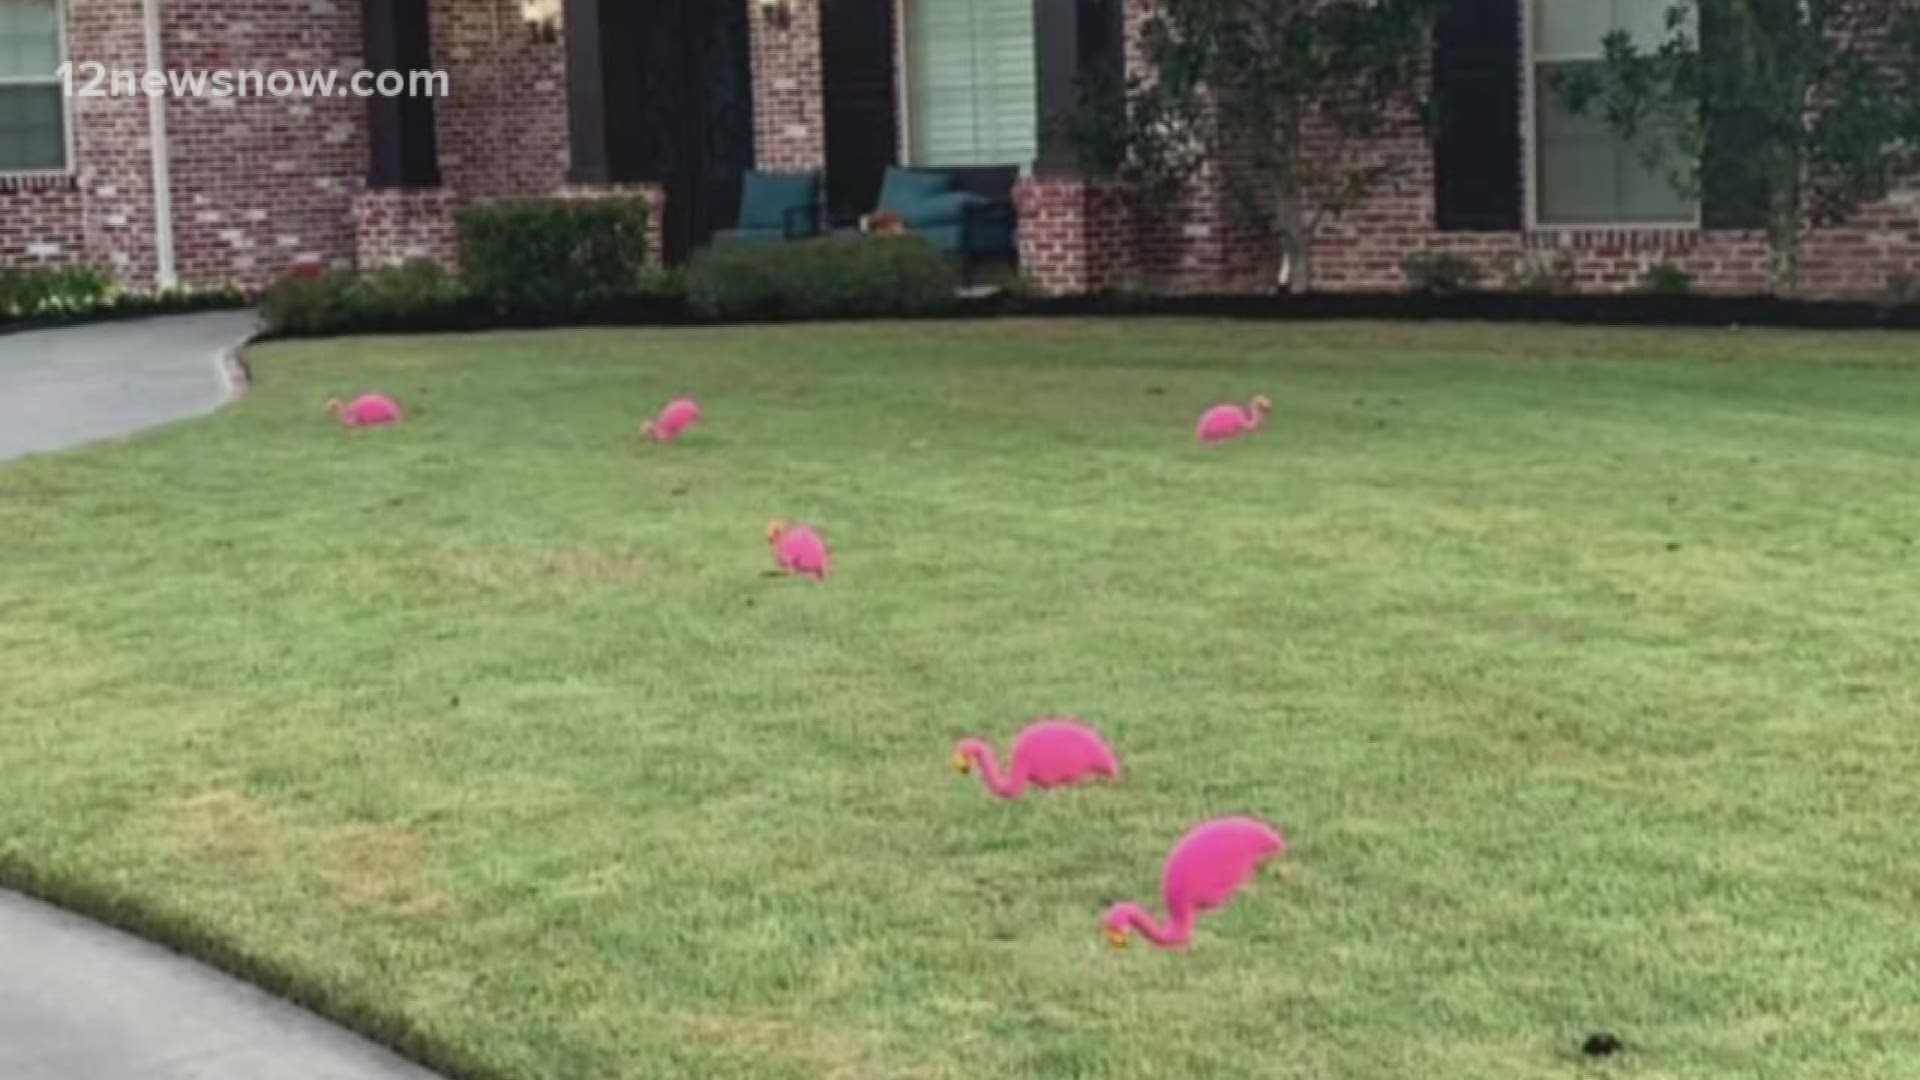 The girls spent five weeks putting plastic pink flamingos in yards at night, encouraging home and business owners to pay $20 in order to have them removed.